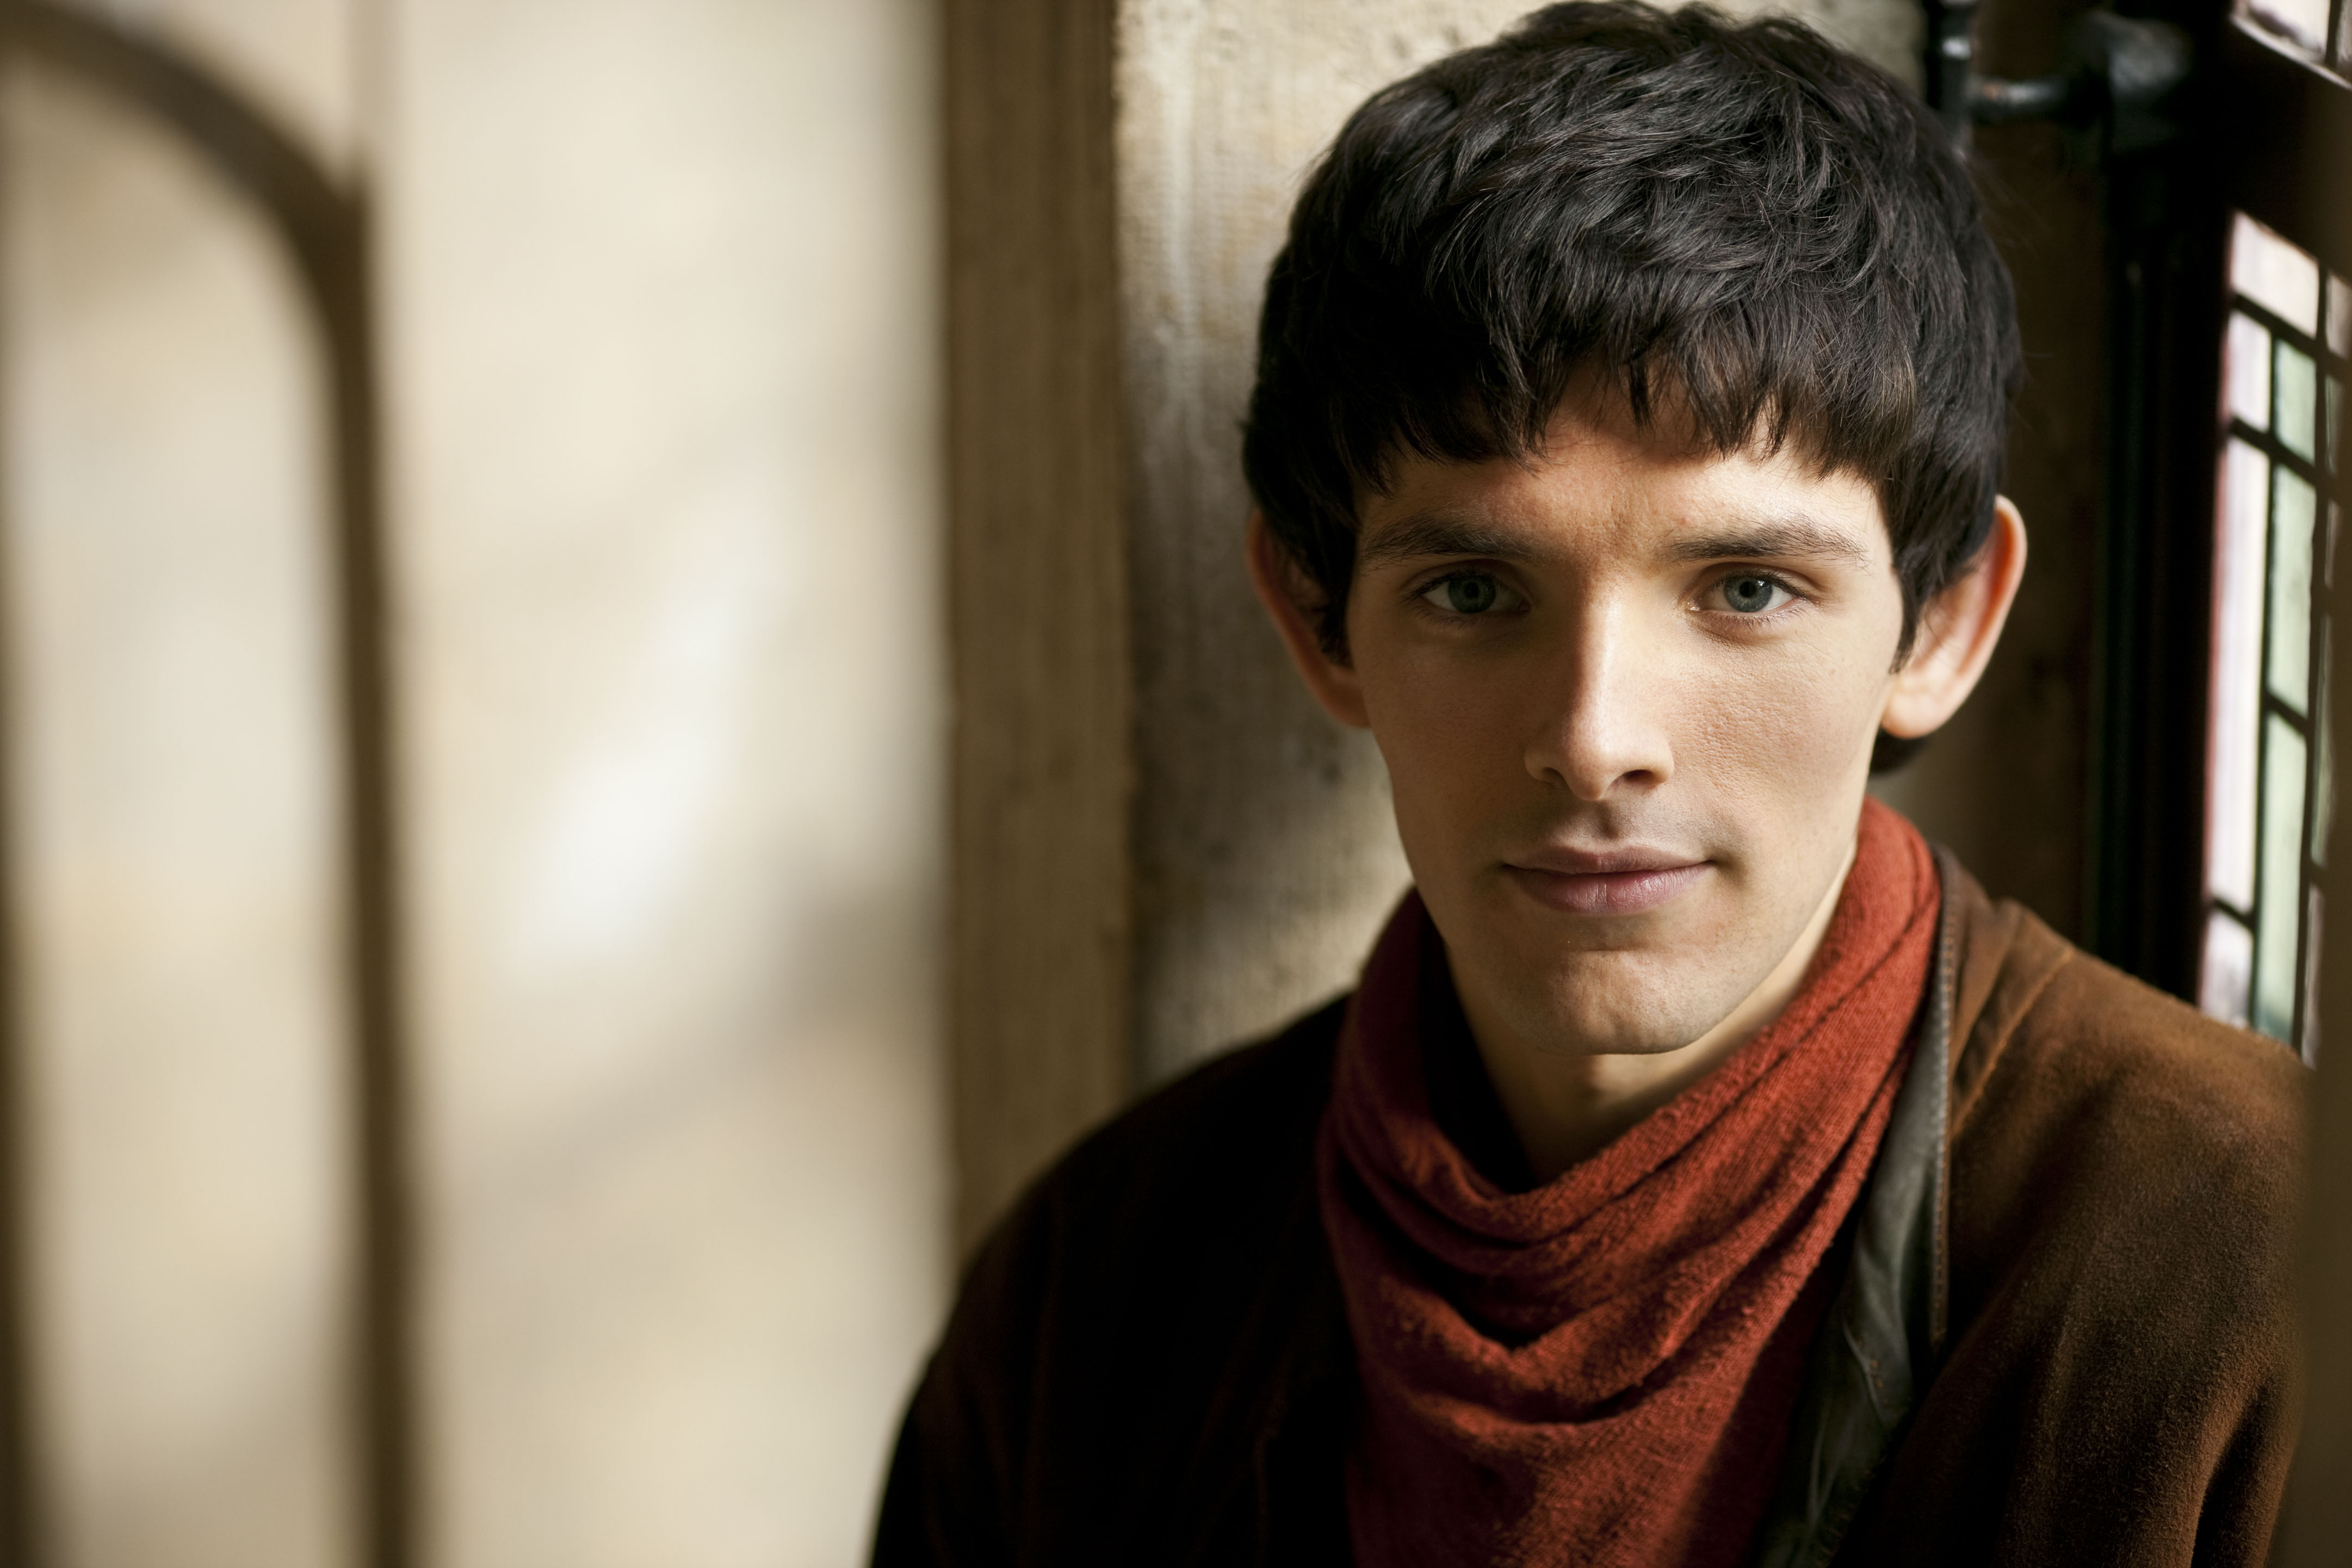 Merlin movie on the way from Hobbit writer | SciFiNow - The World's Best Science ...